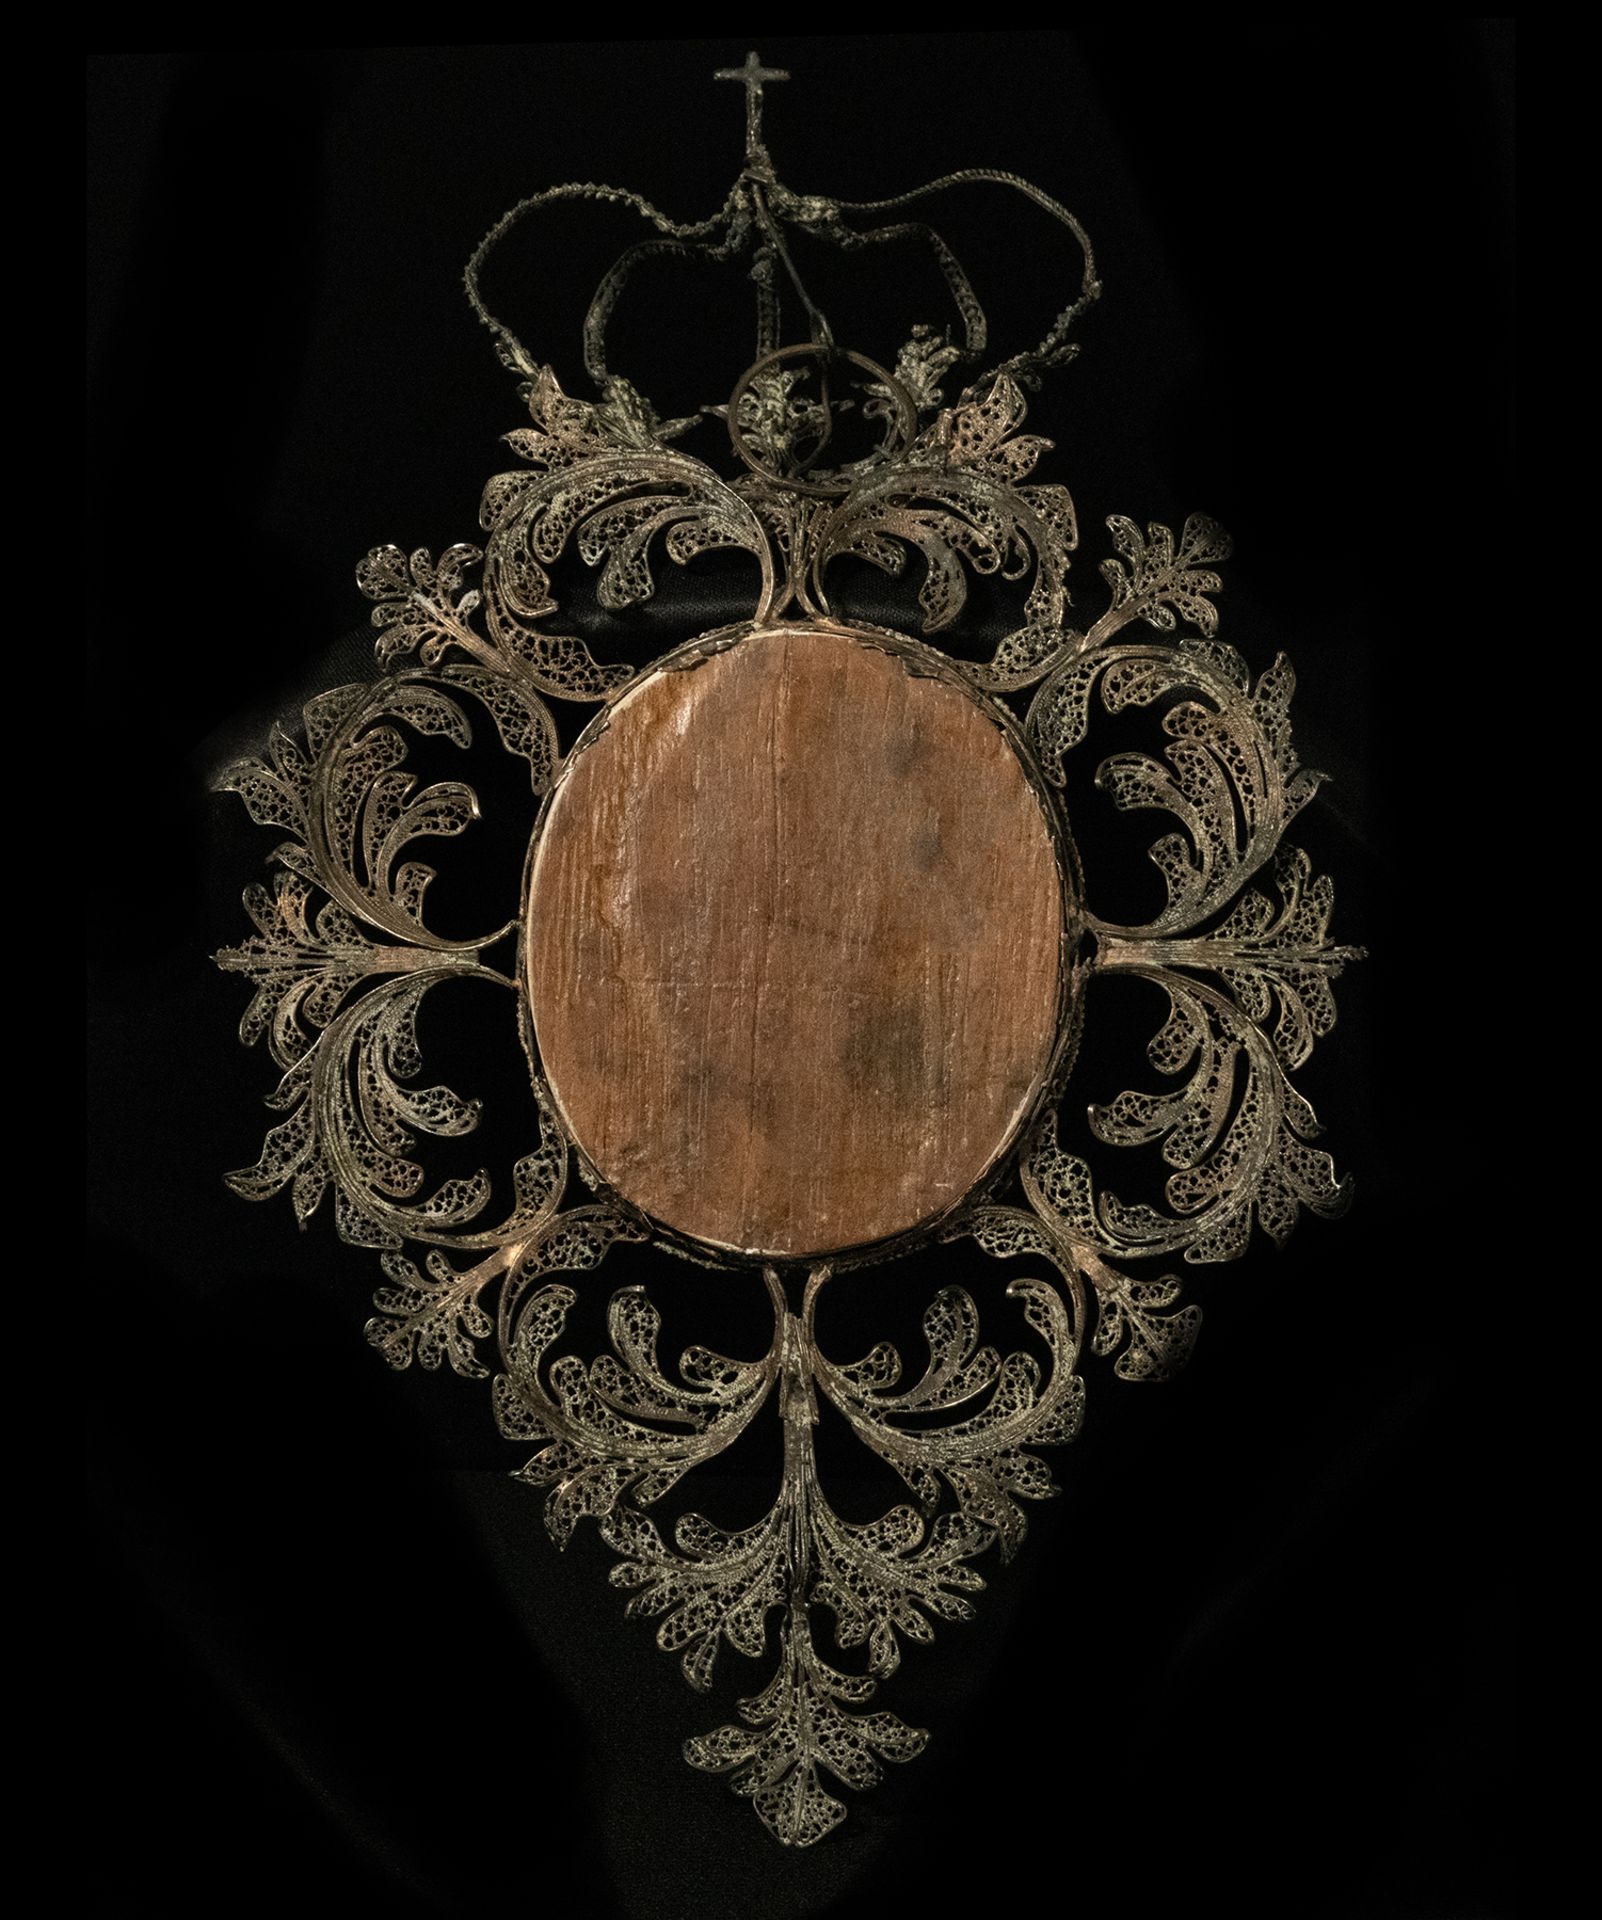 Virgin of Guadalupe in oval on board with mother-of-pearl inlays, new Spanish colonial 18th century - Bild 5 aus 5